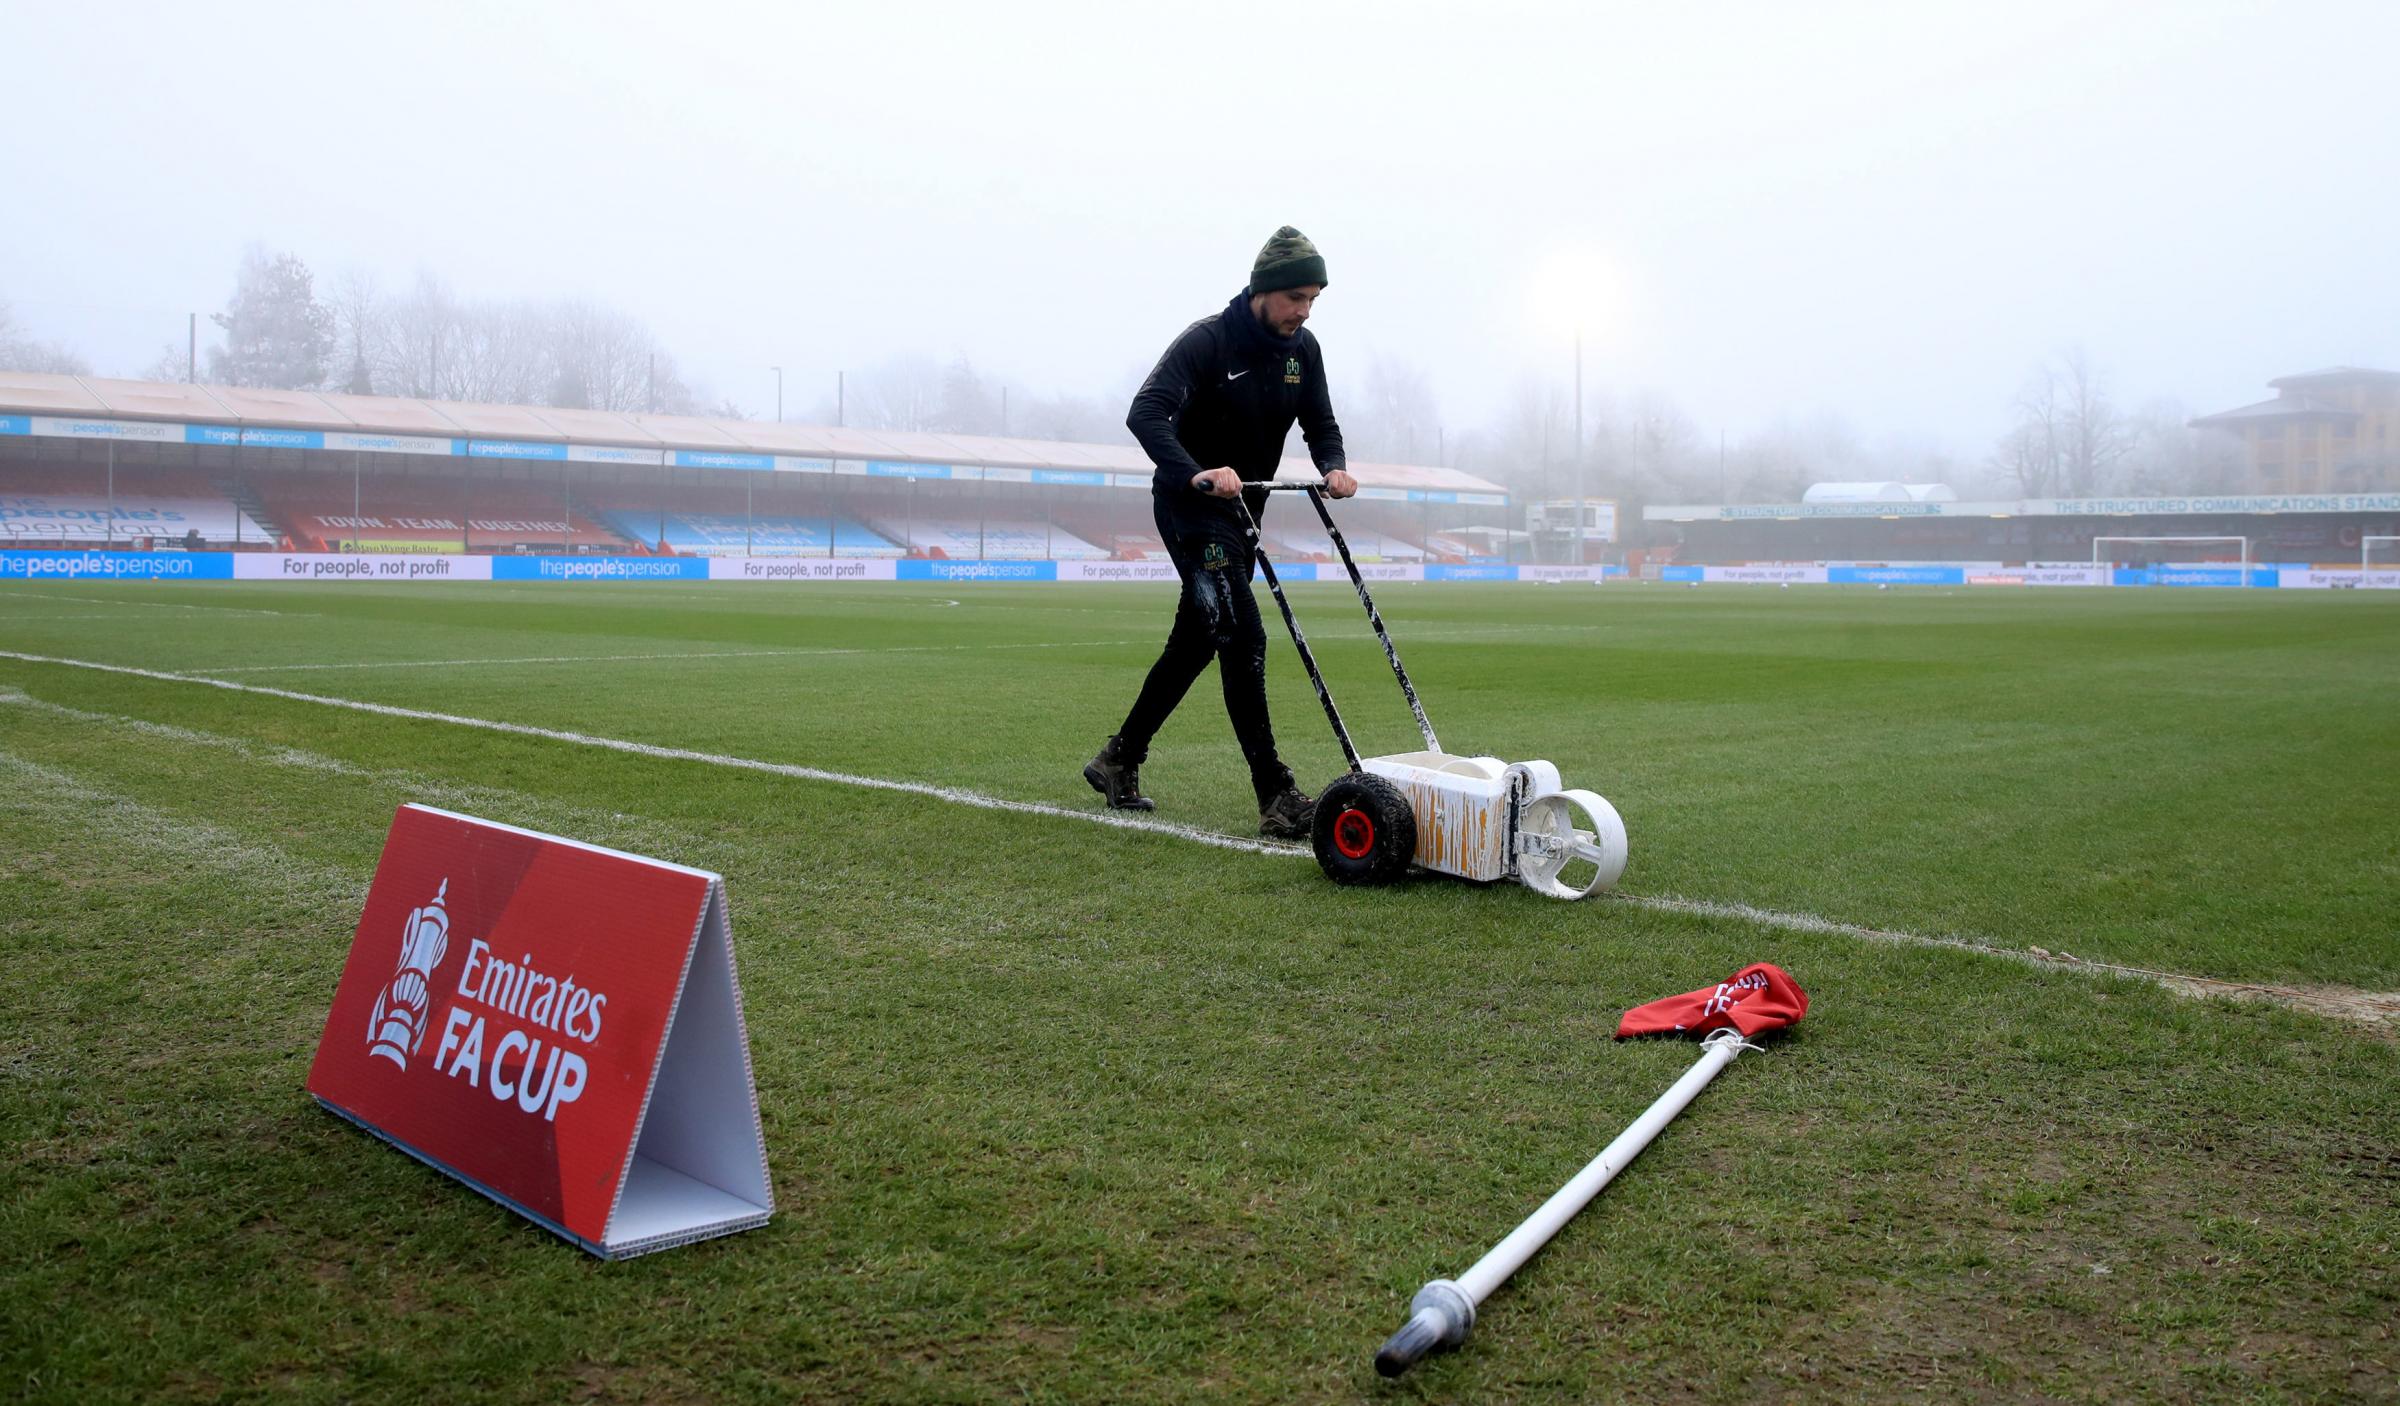 Cherries' FA Cup tie with Crawley is postponed due to COVID